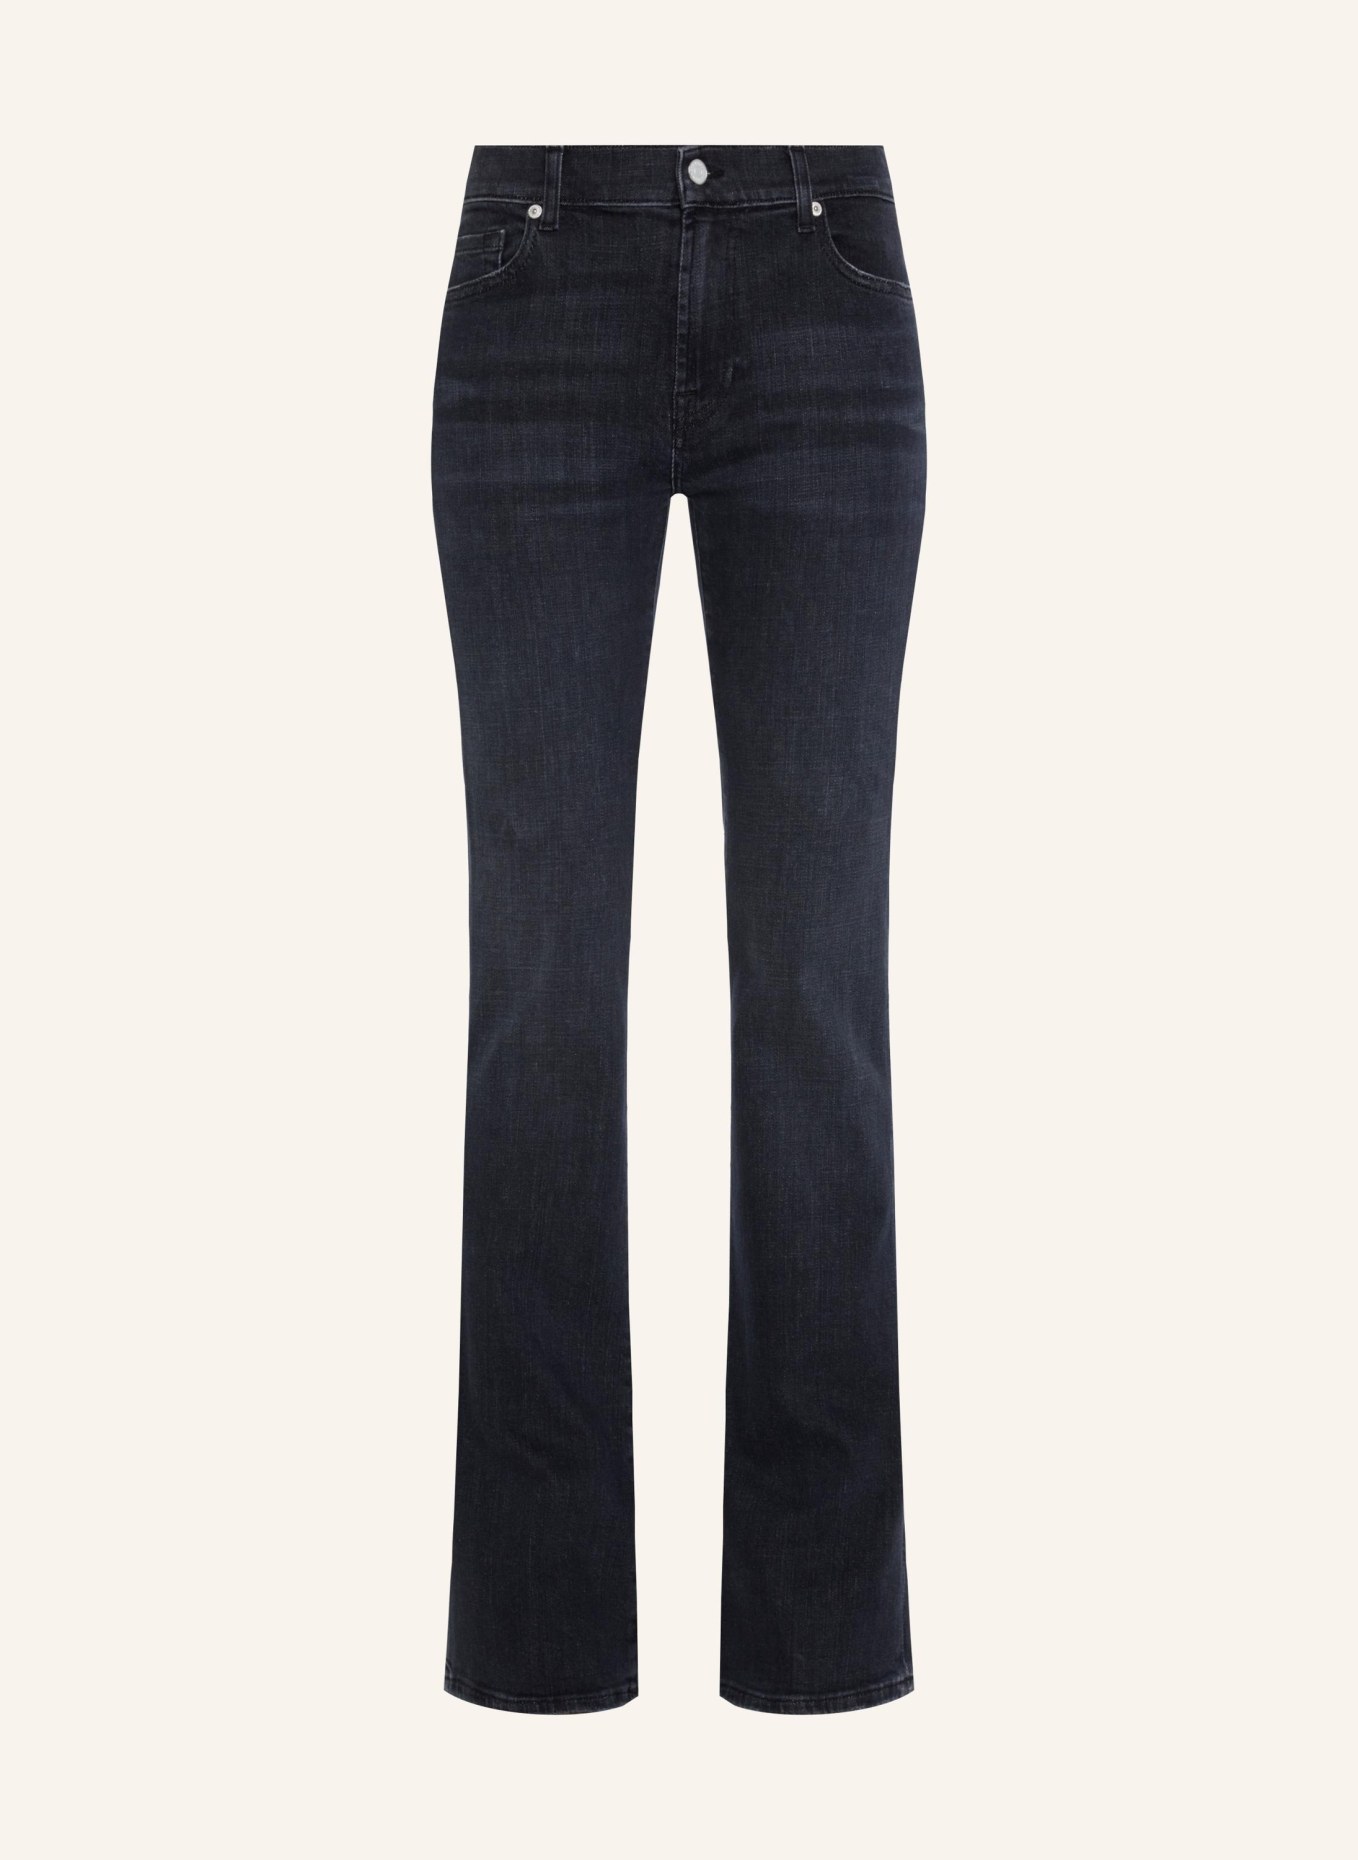 7 for all mankind Jeans BOOTCUT Bootcut fit, Farbe: SCHWARZ (Bild 1)